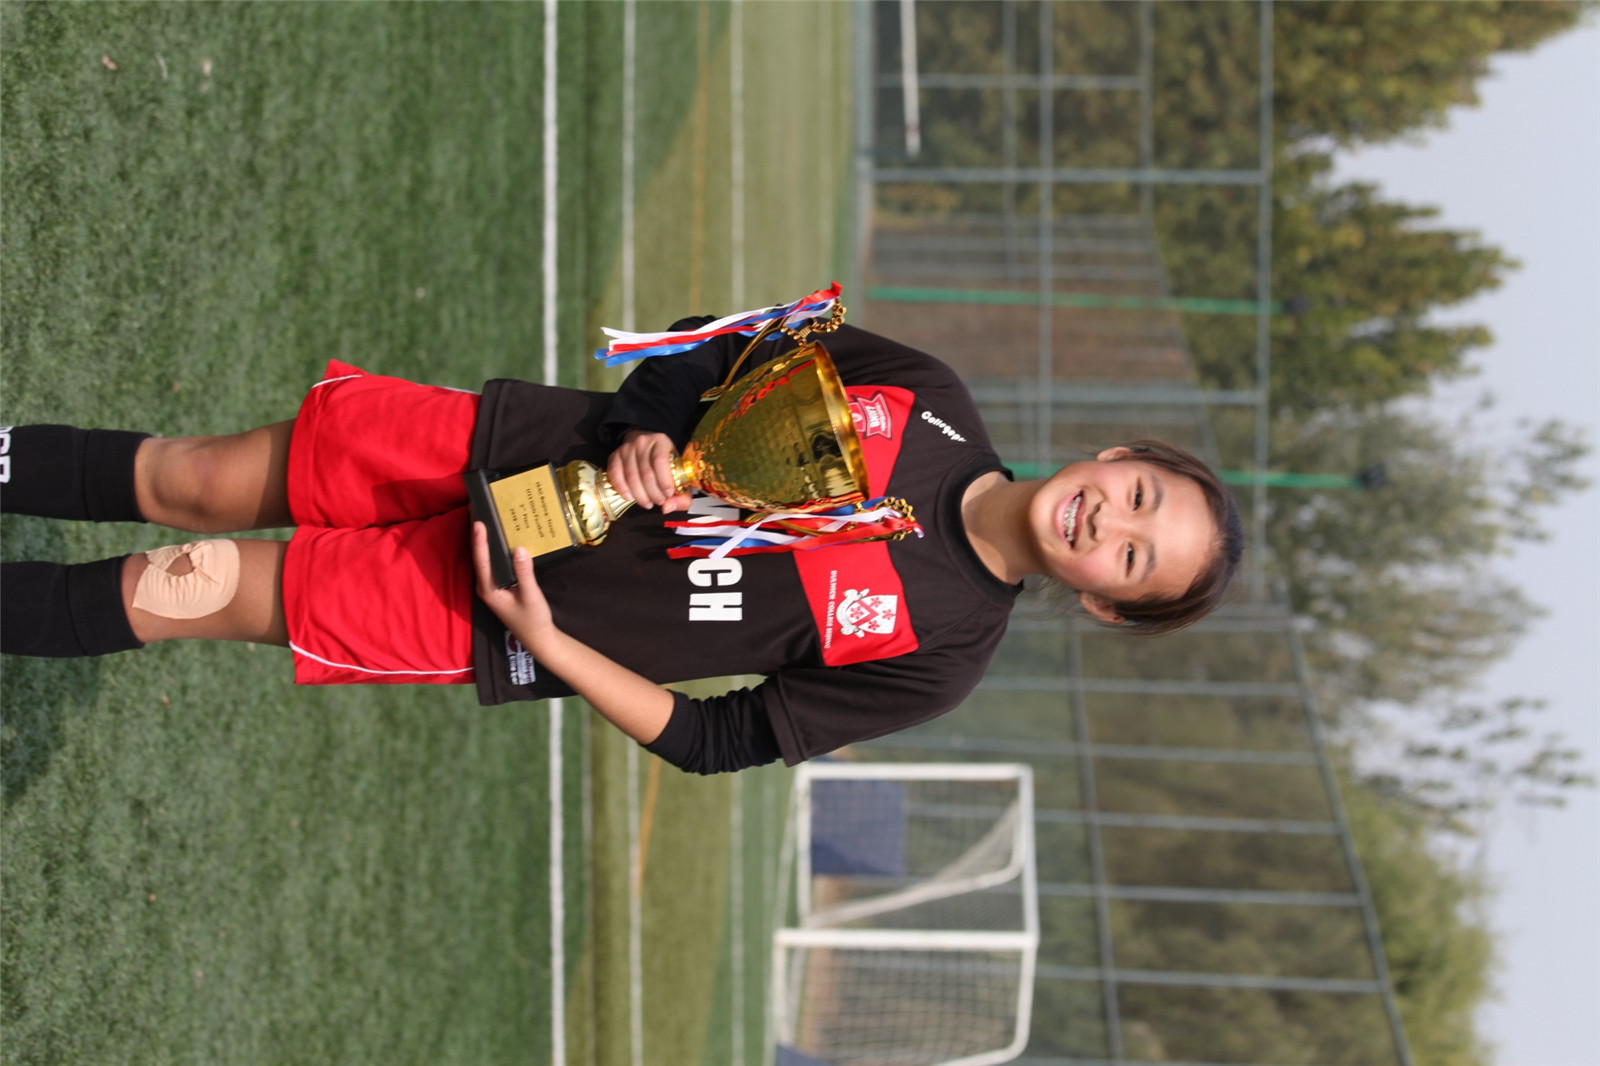 The team placed second at the 2018-2019 ISAC-Tianjin Football U13 Girls Football